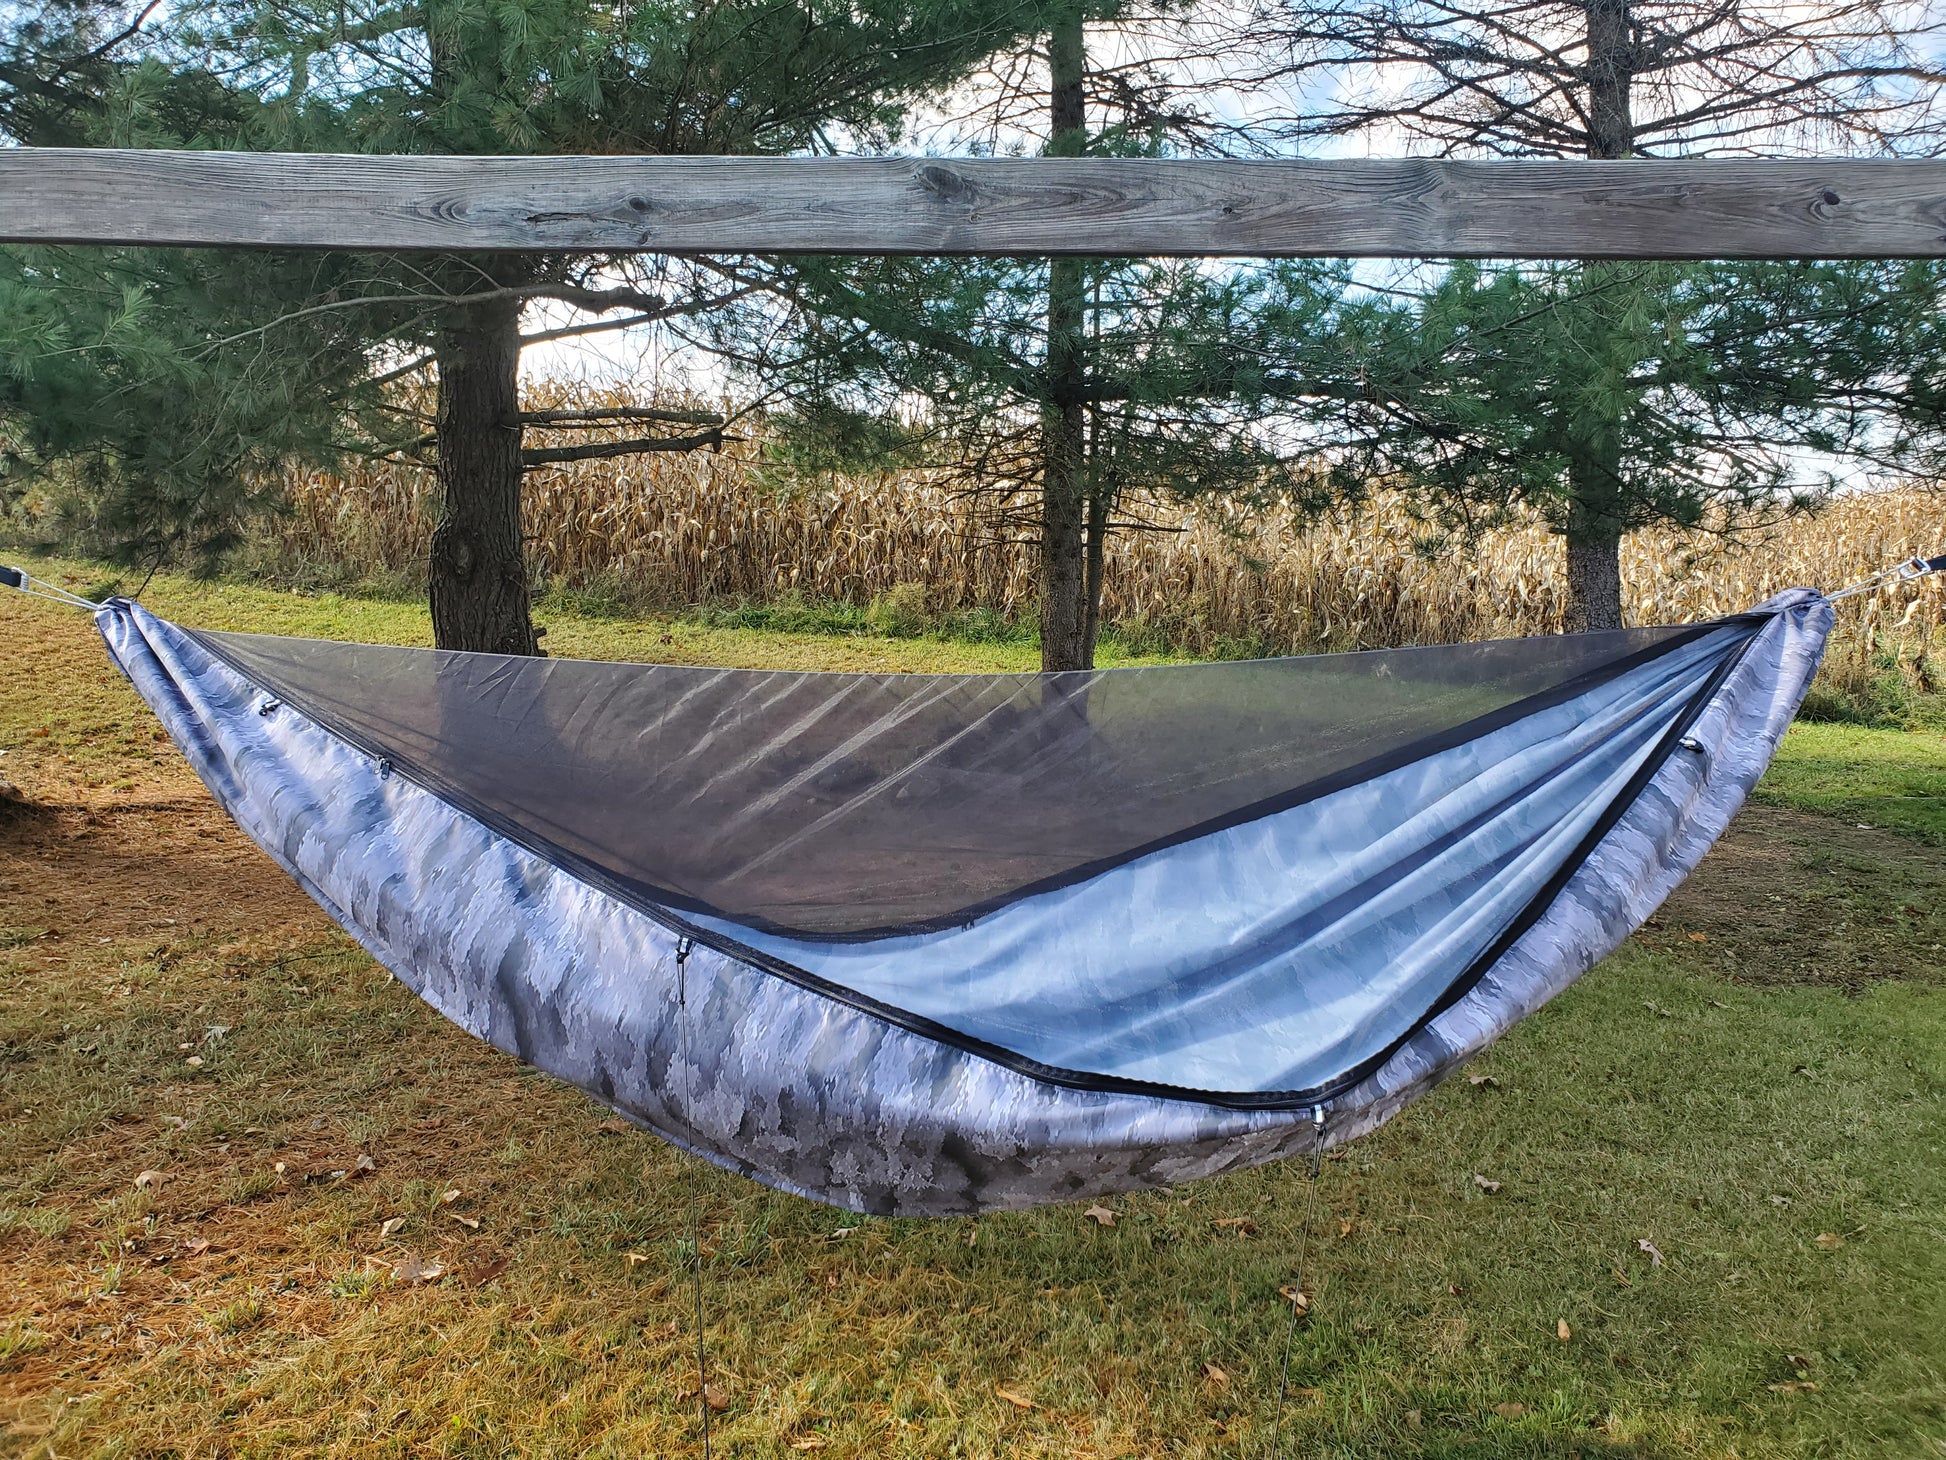 ultralight a-tacs ix black and white glost hexcam camo camping hammock ghost custom made dream hammock with bugnet or mosquito net